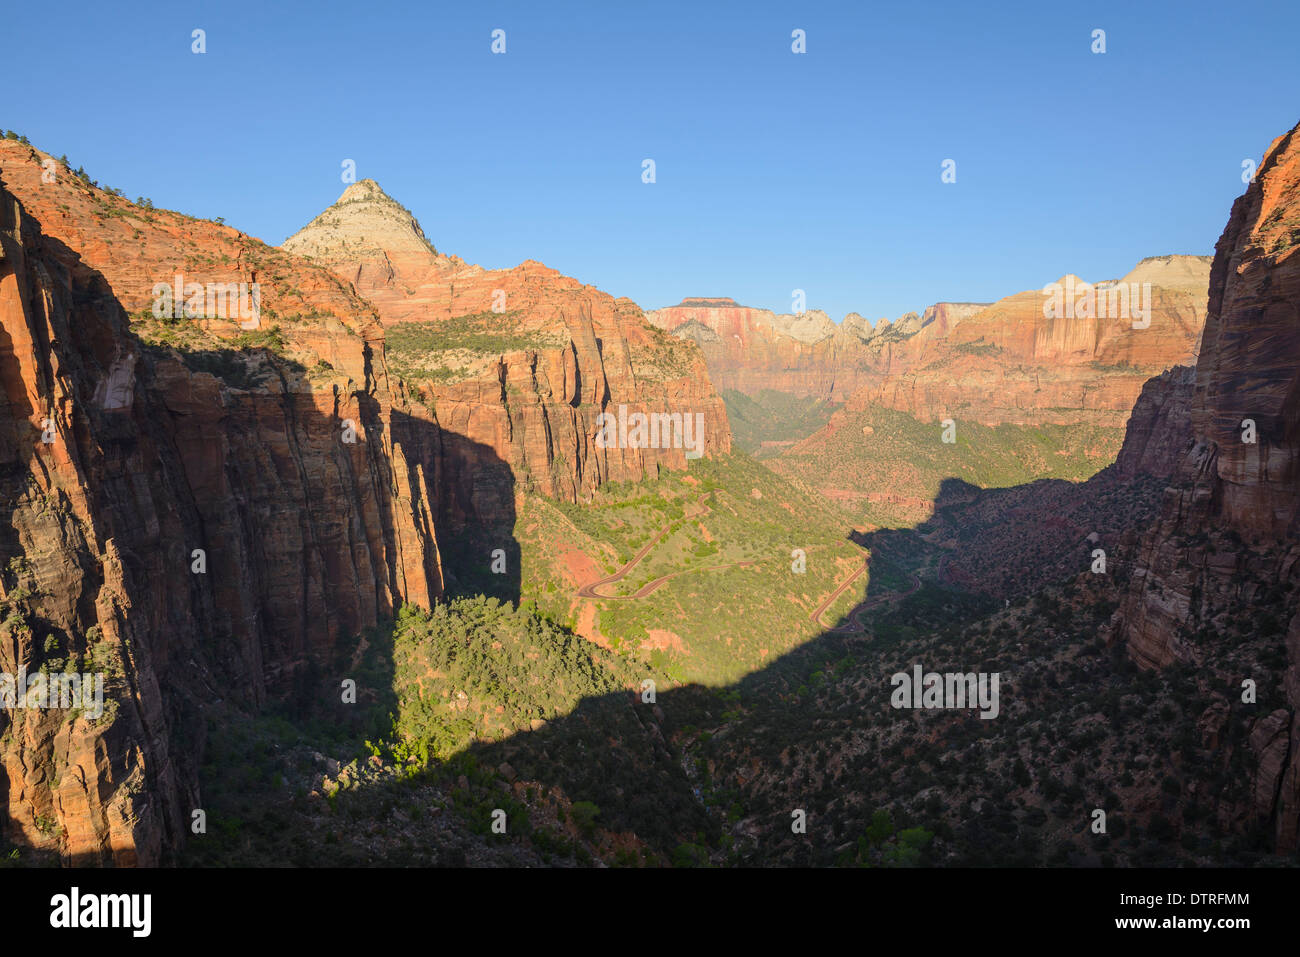 Views from Canyon Overlook trail, Zion National Park, Utah, USA Stock Photo